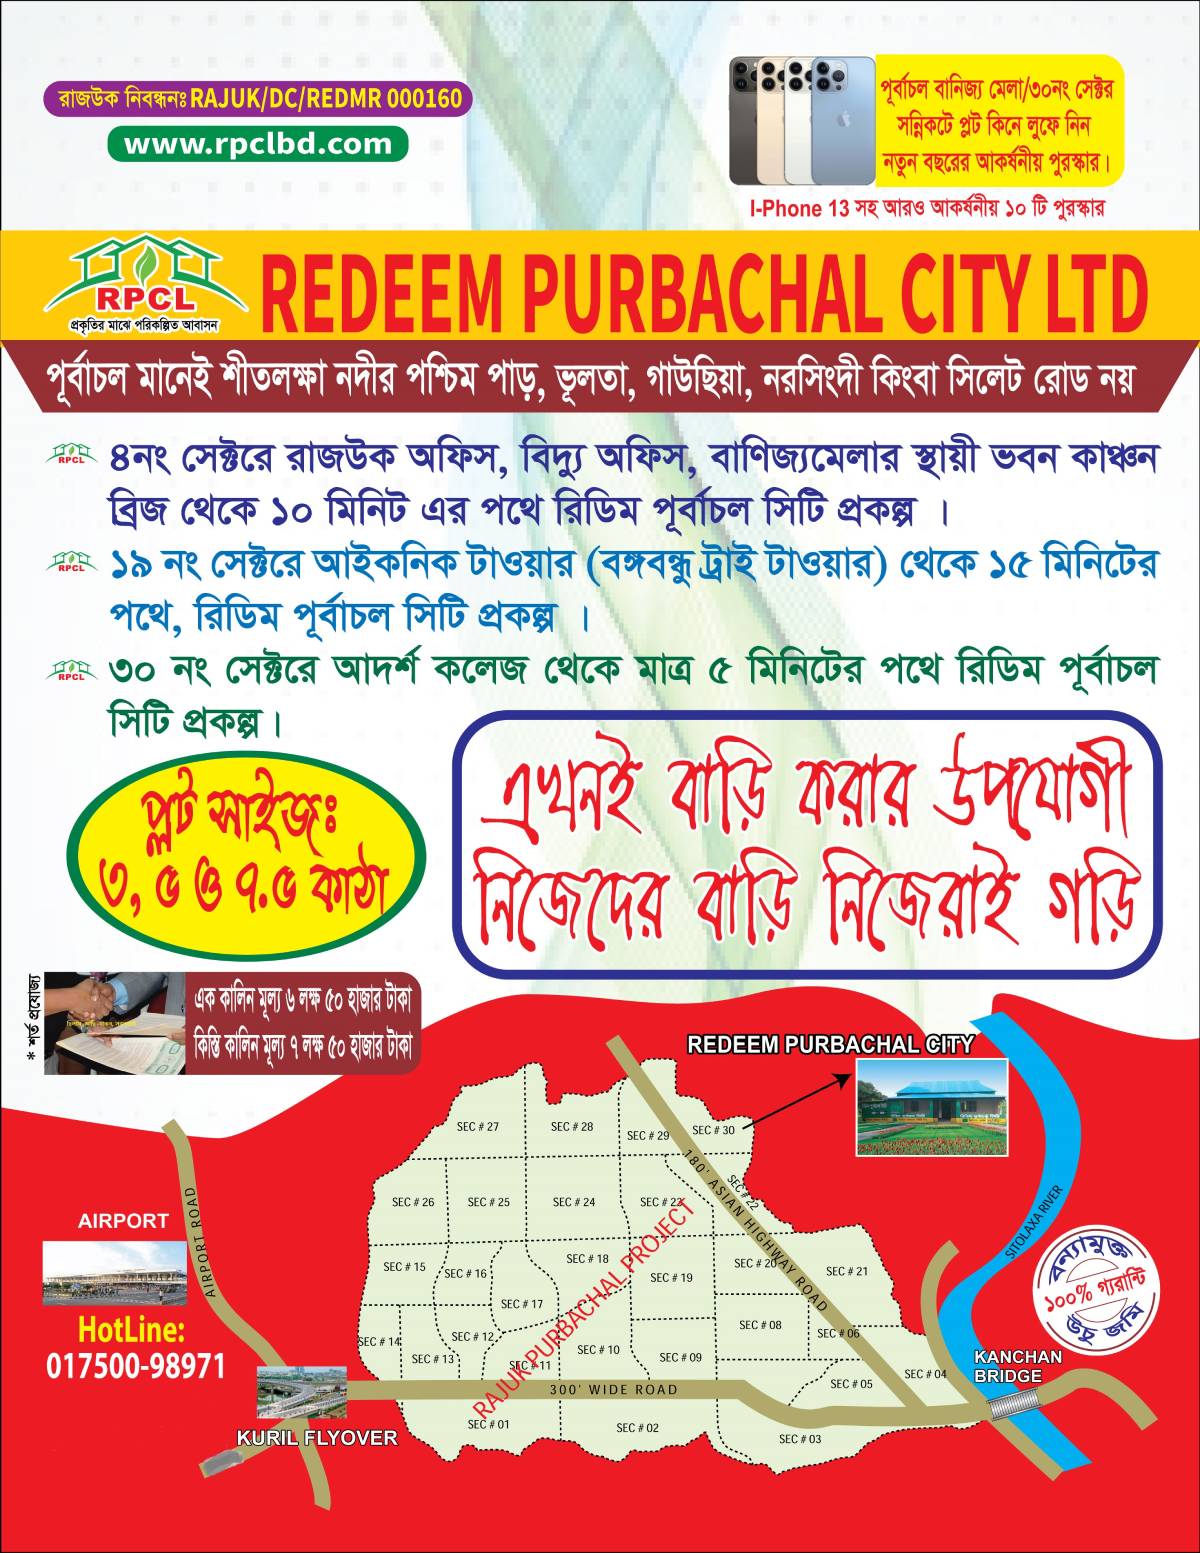 Offer from Redeem Purbachal City